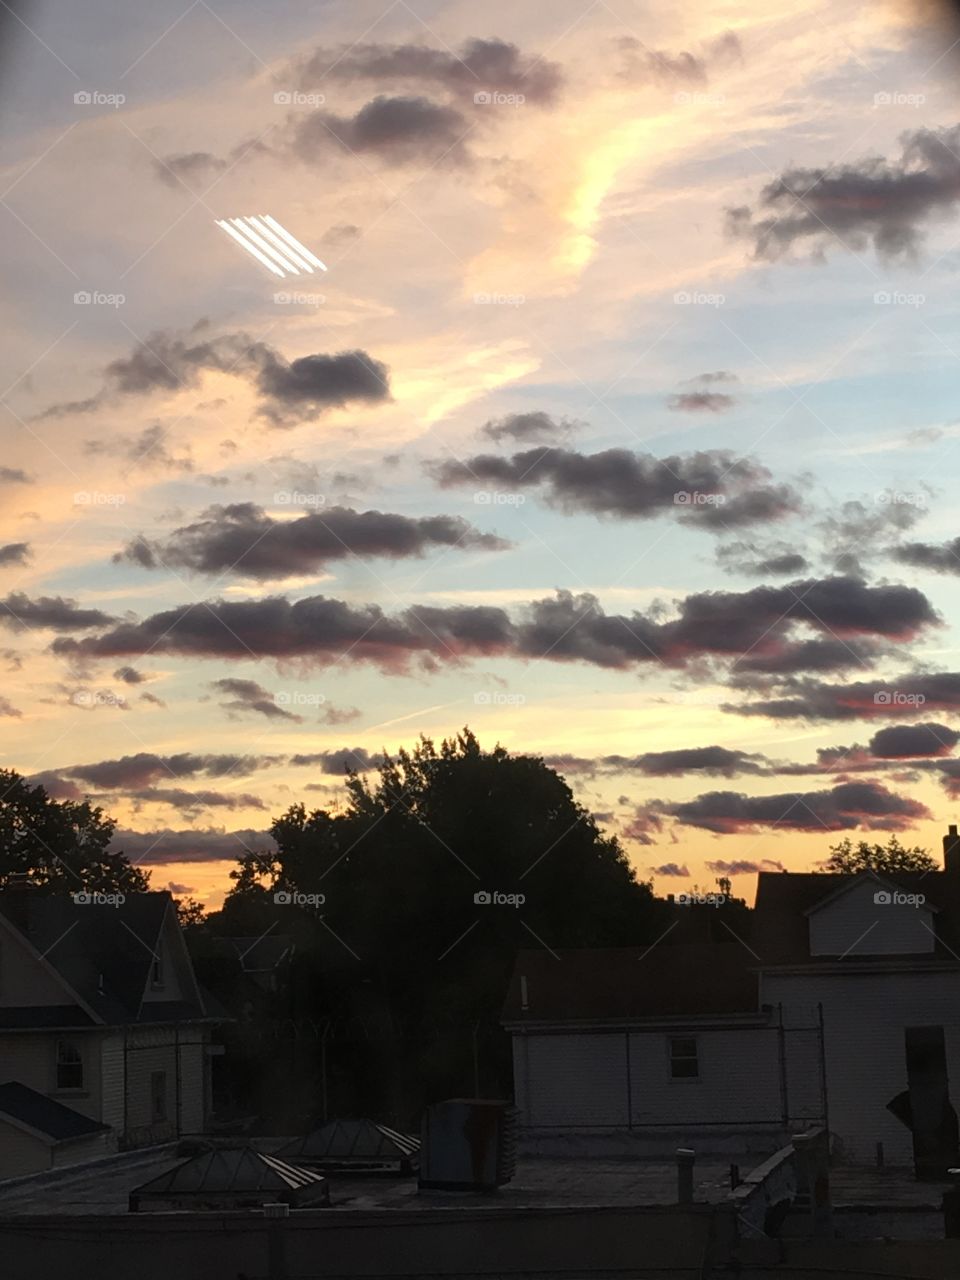 A nyc queens sunset 